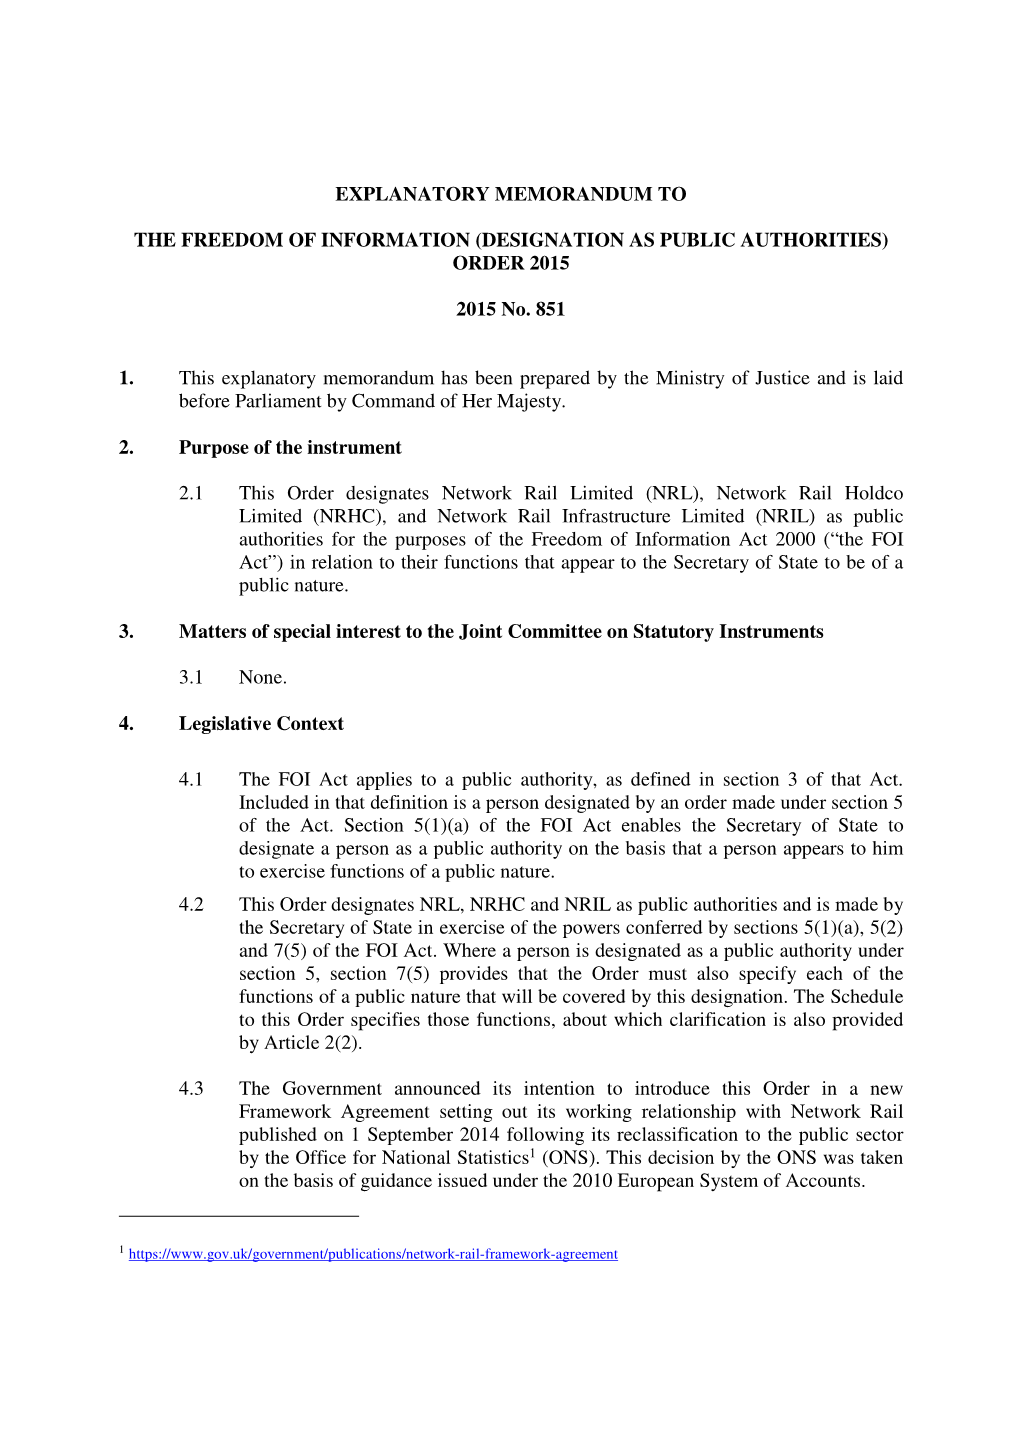 The Freedom of Information (Designation As Public Authorities) Order 2015